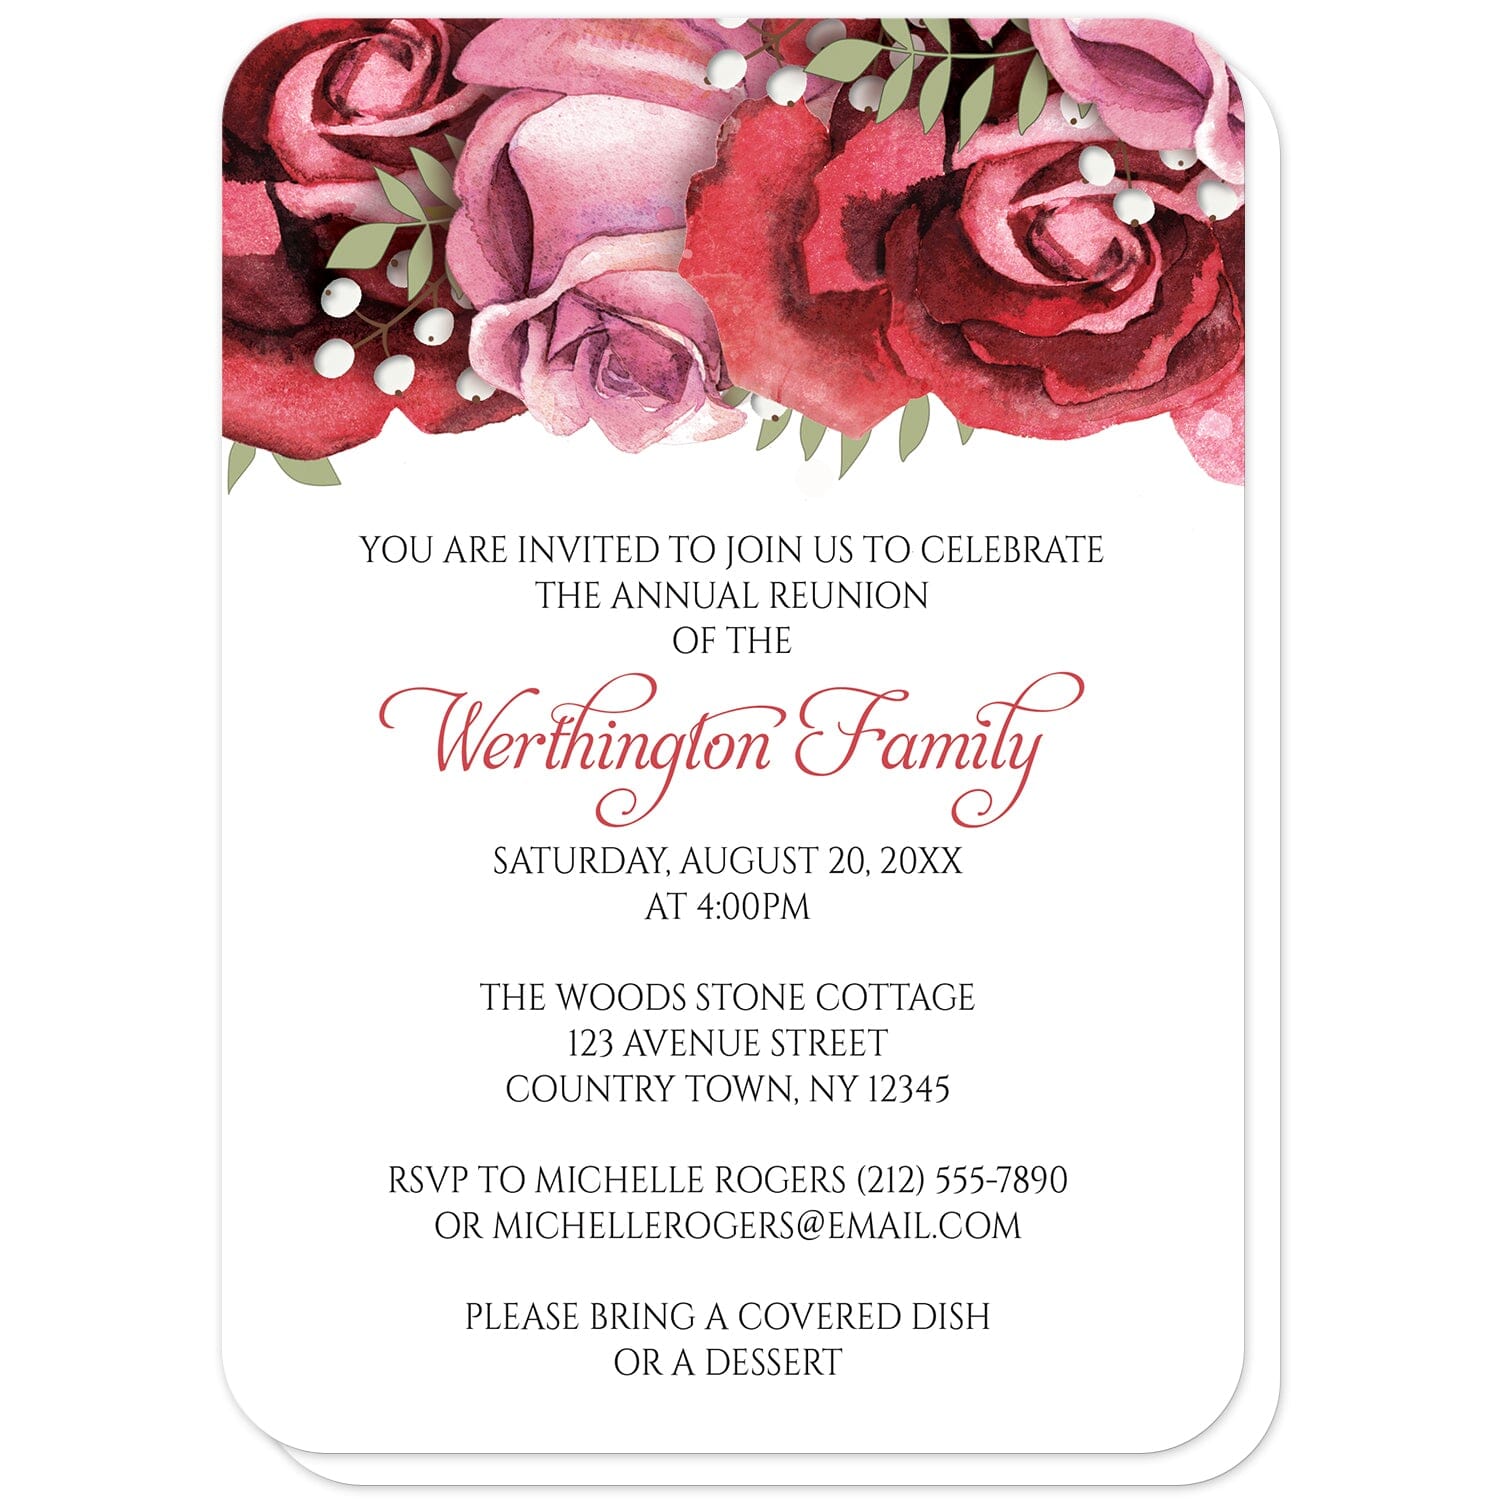 Burgundy Red Pink Rose Family Reunion Invitations (with rounded corners) at Artistically Invited. Pretty burgundy red pink rose family reunion invitations with gorgeous burgundy red and pink roses along the top. Your personalized family reunion celebration details are custom printed in burgundy and black on white below the beautiful roses illustration. 